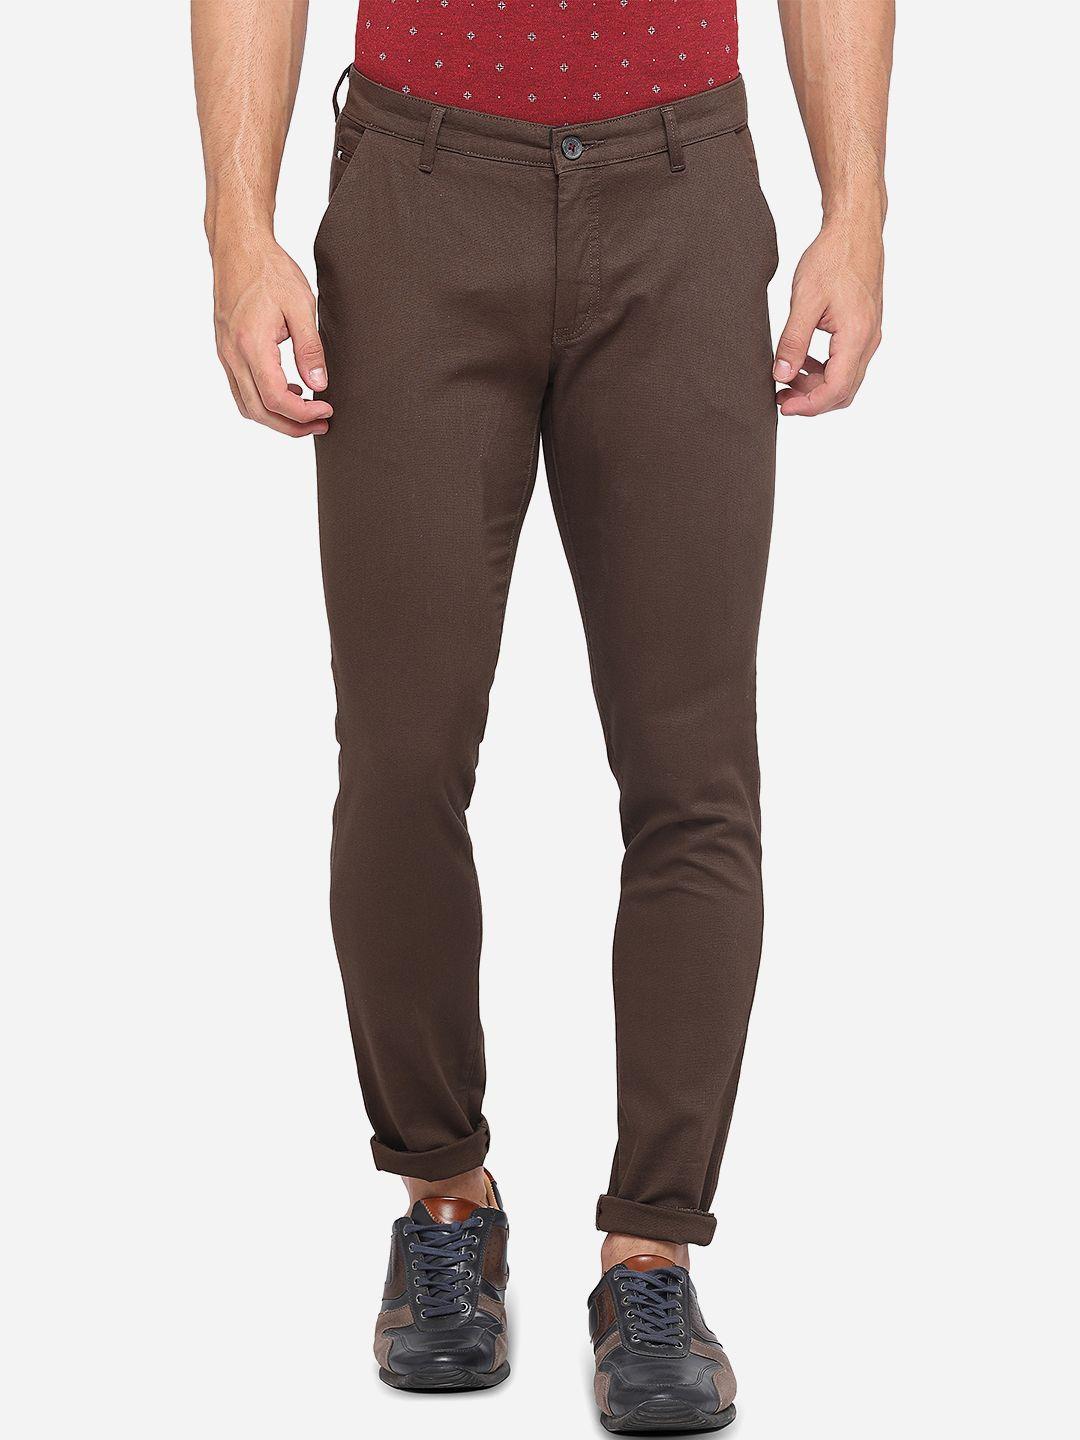 greenfibre-men-olive-brown-slim-fit-easy-wash-chinos-trousers